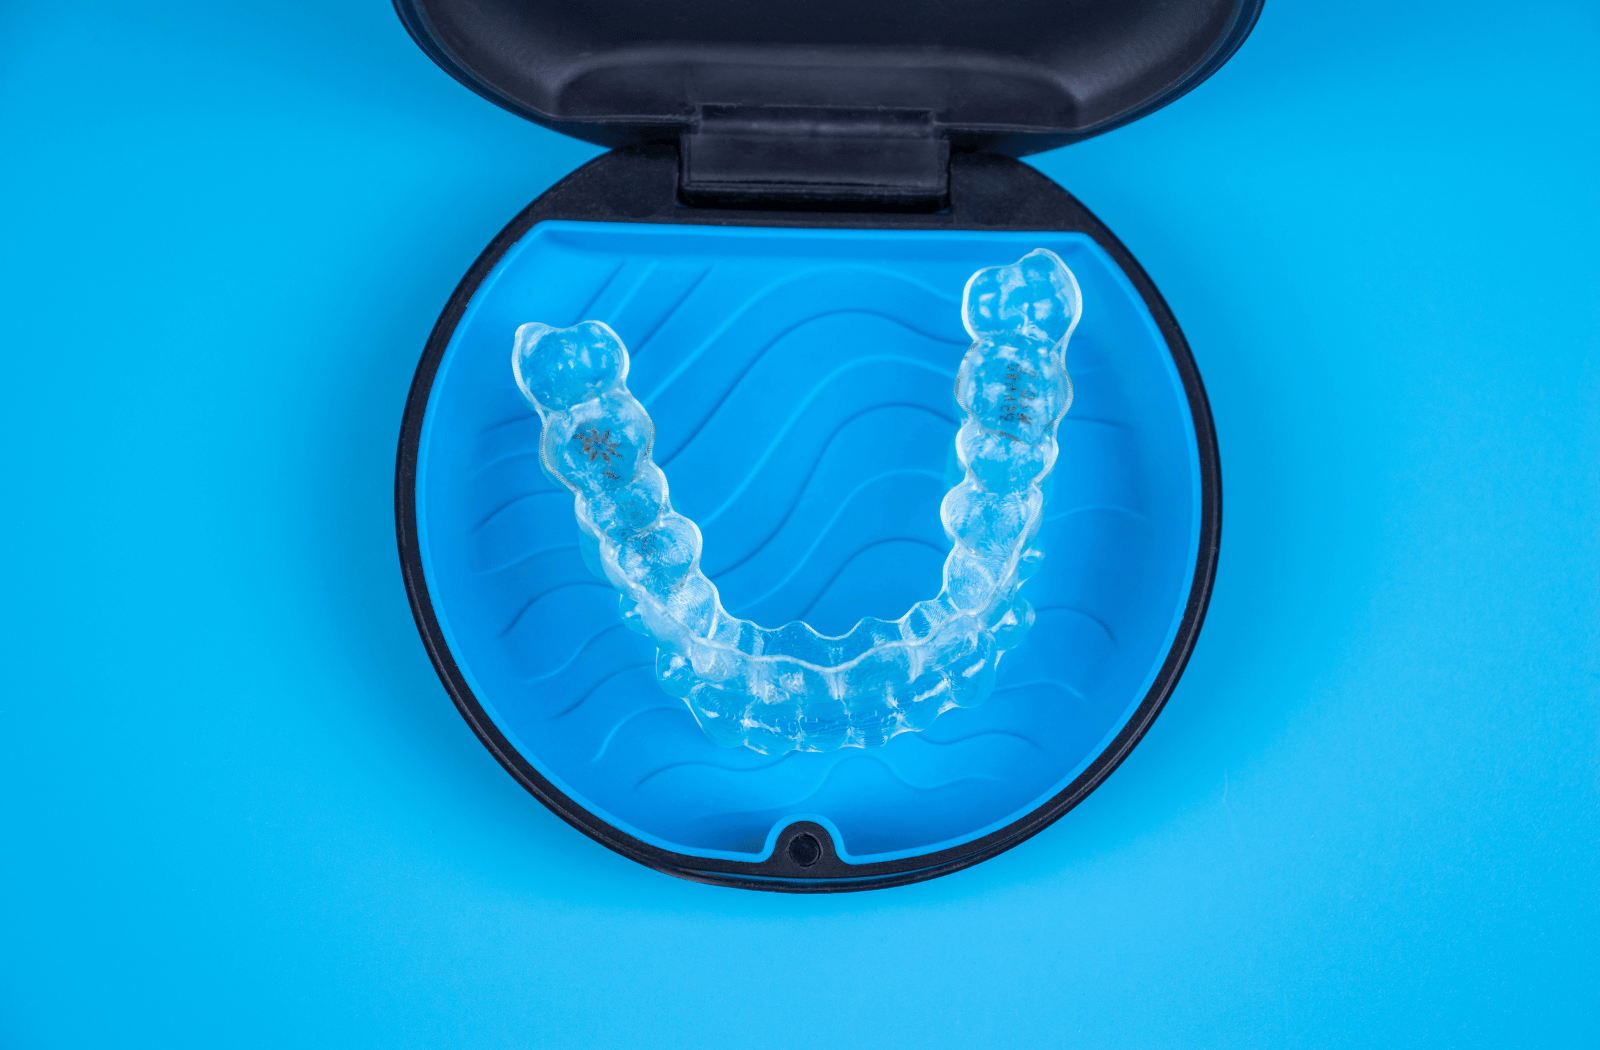 A blue and black protective case containing two Invisalign aligners.